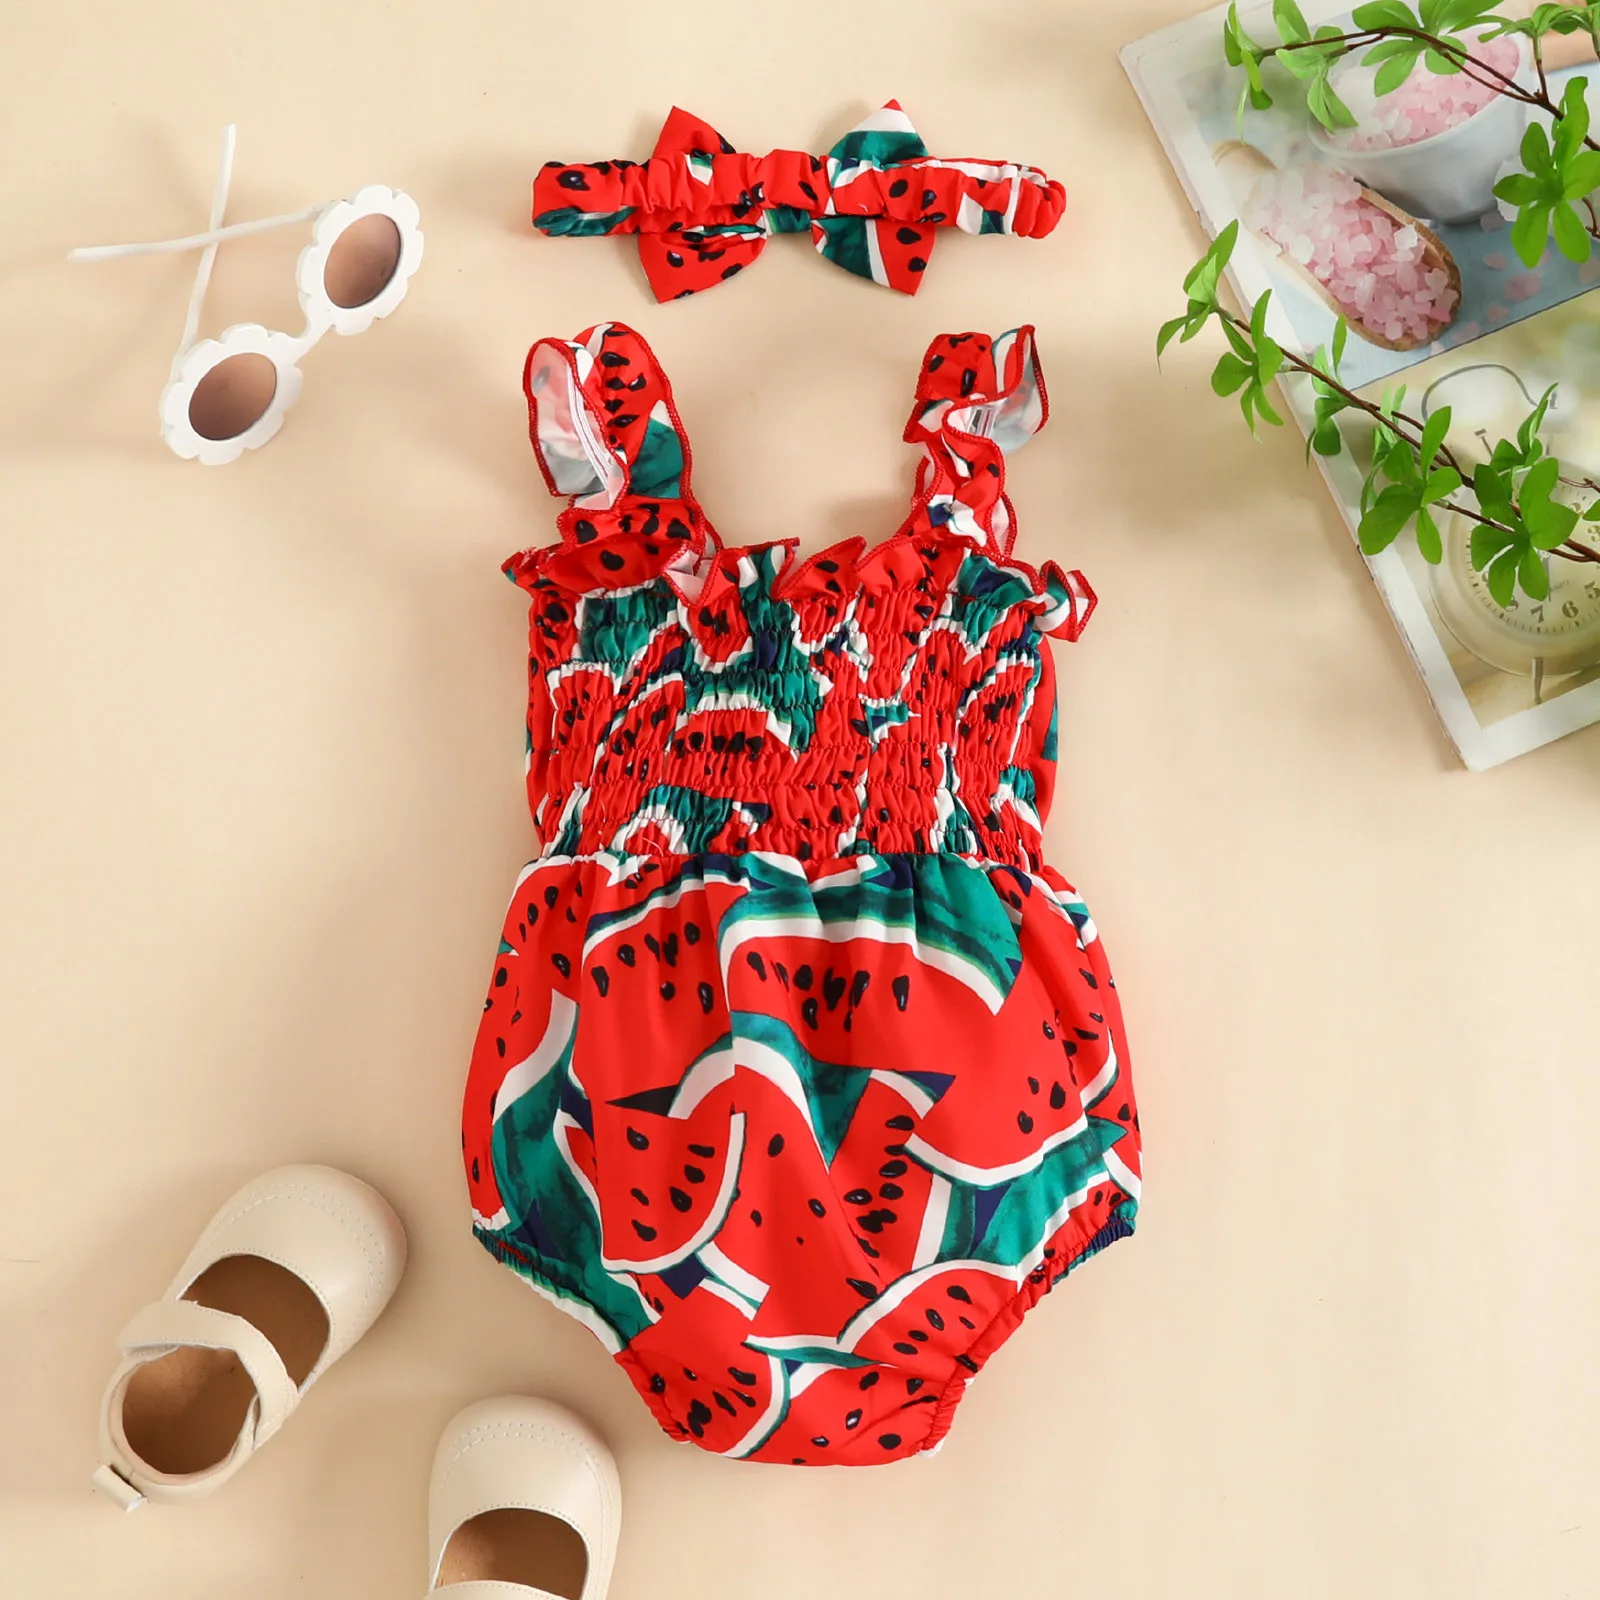 

Infant Baby Girls Bodysuits Watermelon Prints Bowknot Summer Sleeveless Romper+Headbands Sets 0-18 Months Baby Party Clothes